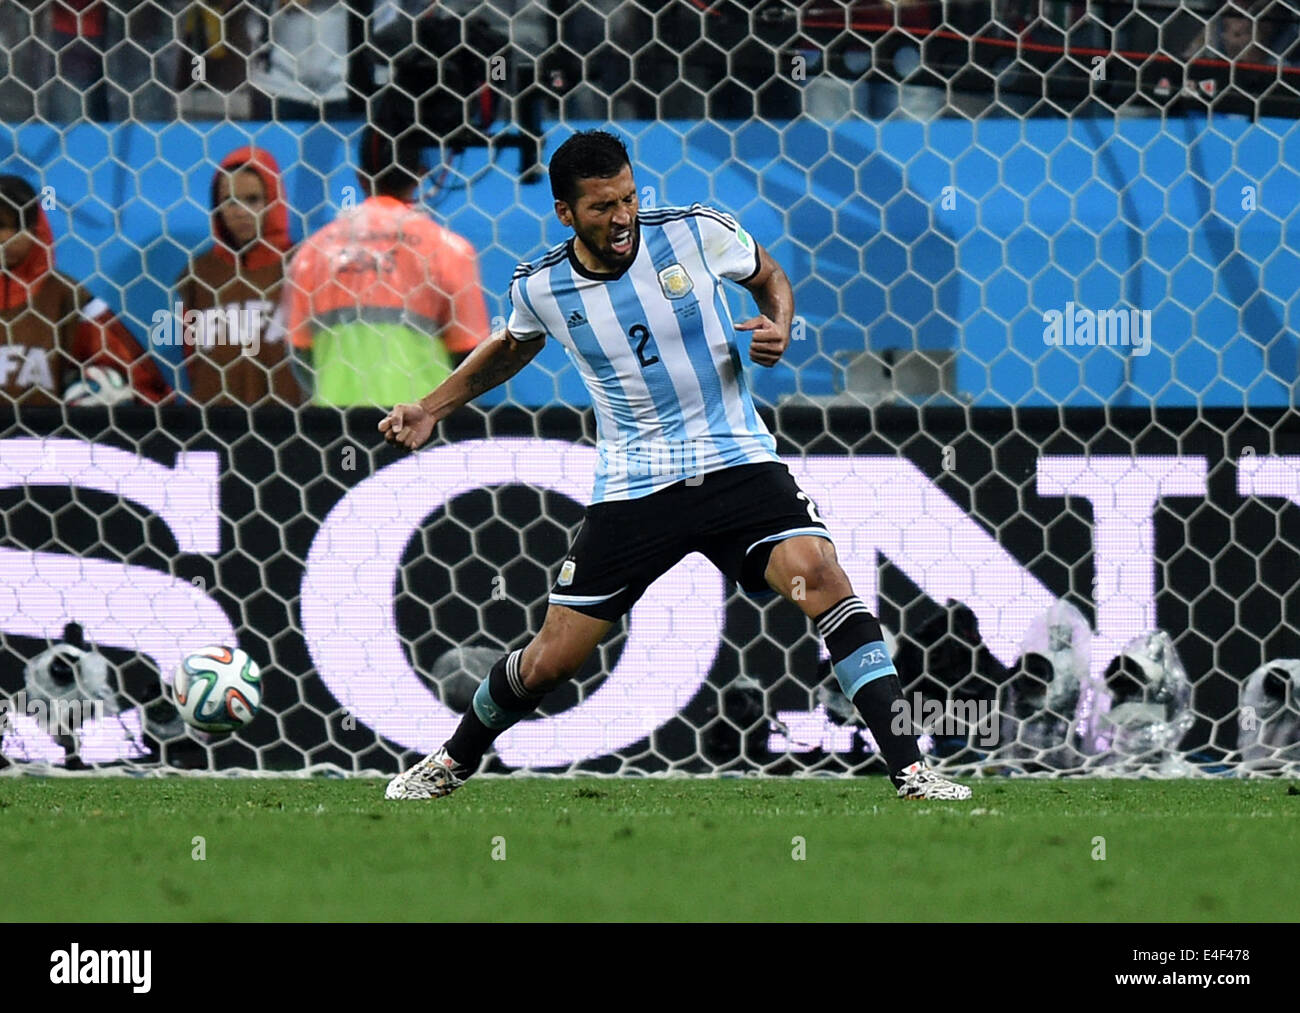 Sao Paulo, Brazil. 09th July, 2014. Argentina's Ezequiel Garay celebrates after scoring the 1-2 goal during the penalty shoot-out during the FIFA World Cup 2014 semi-final soccer match between the Netherlands and Argentina at the Arena Corinthians in Sao Paulo, Brazil, 09 July 2014. Photo: Marius Becker/dpa/Alamy Live News Stock Photo